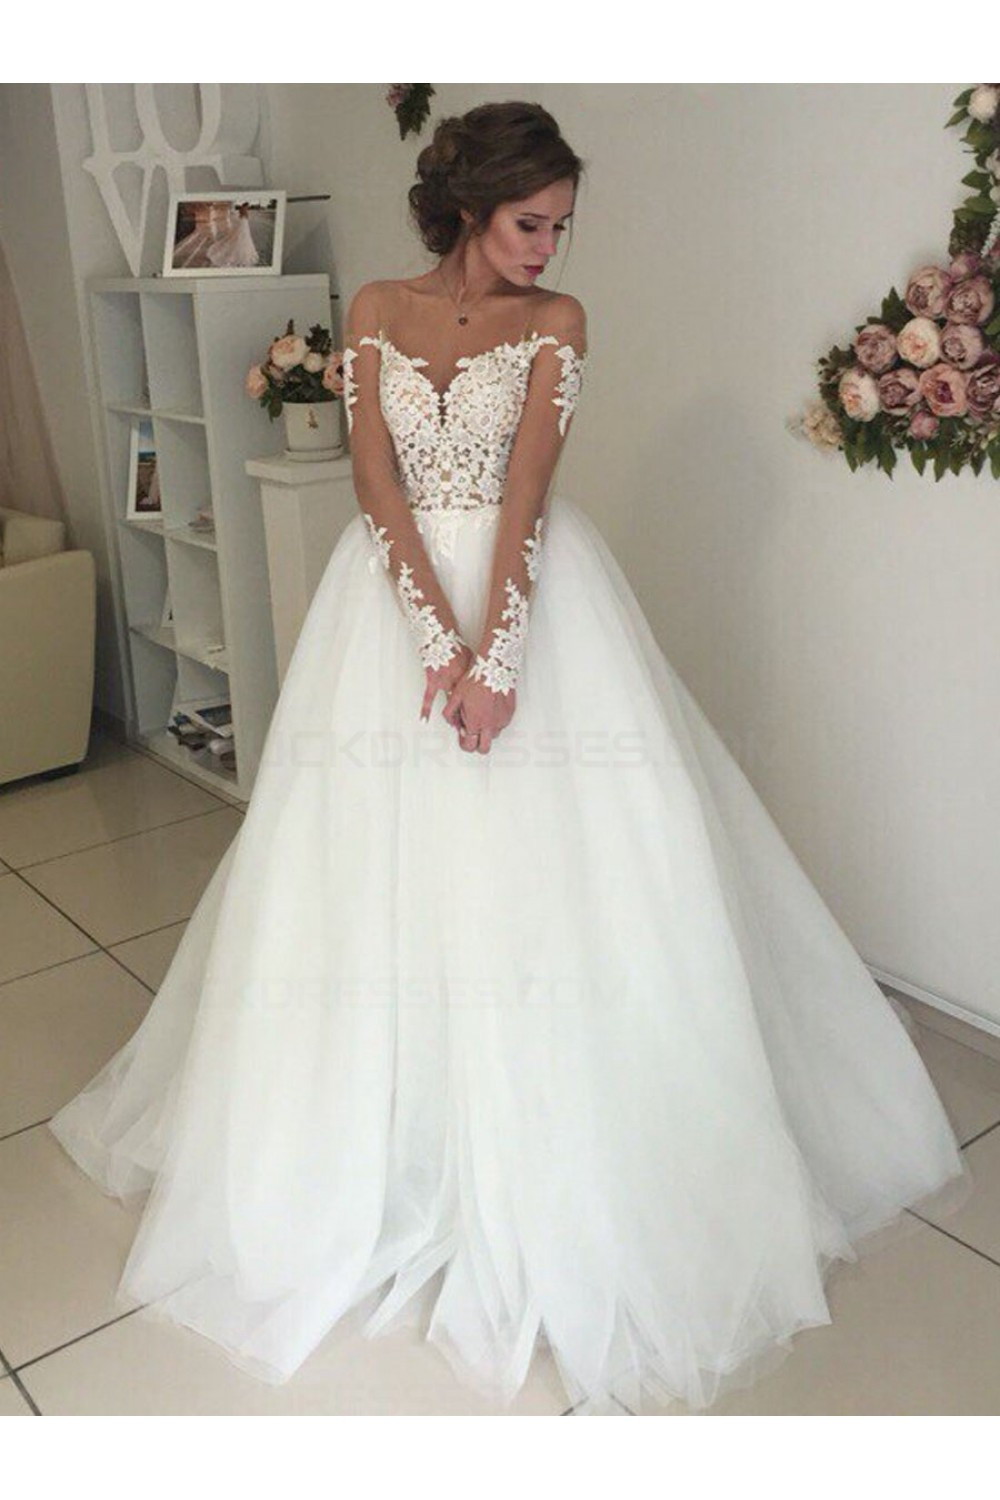 Wedding Gowns Lace
 Long Sleeves Lace Illusion Neckline Wedding Dresses Bridal